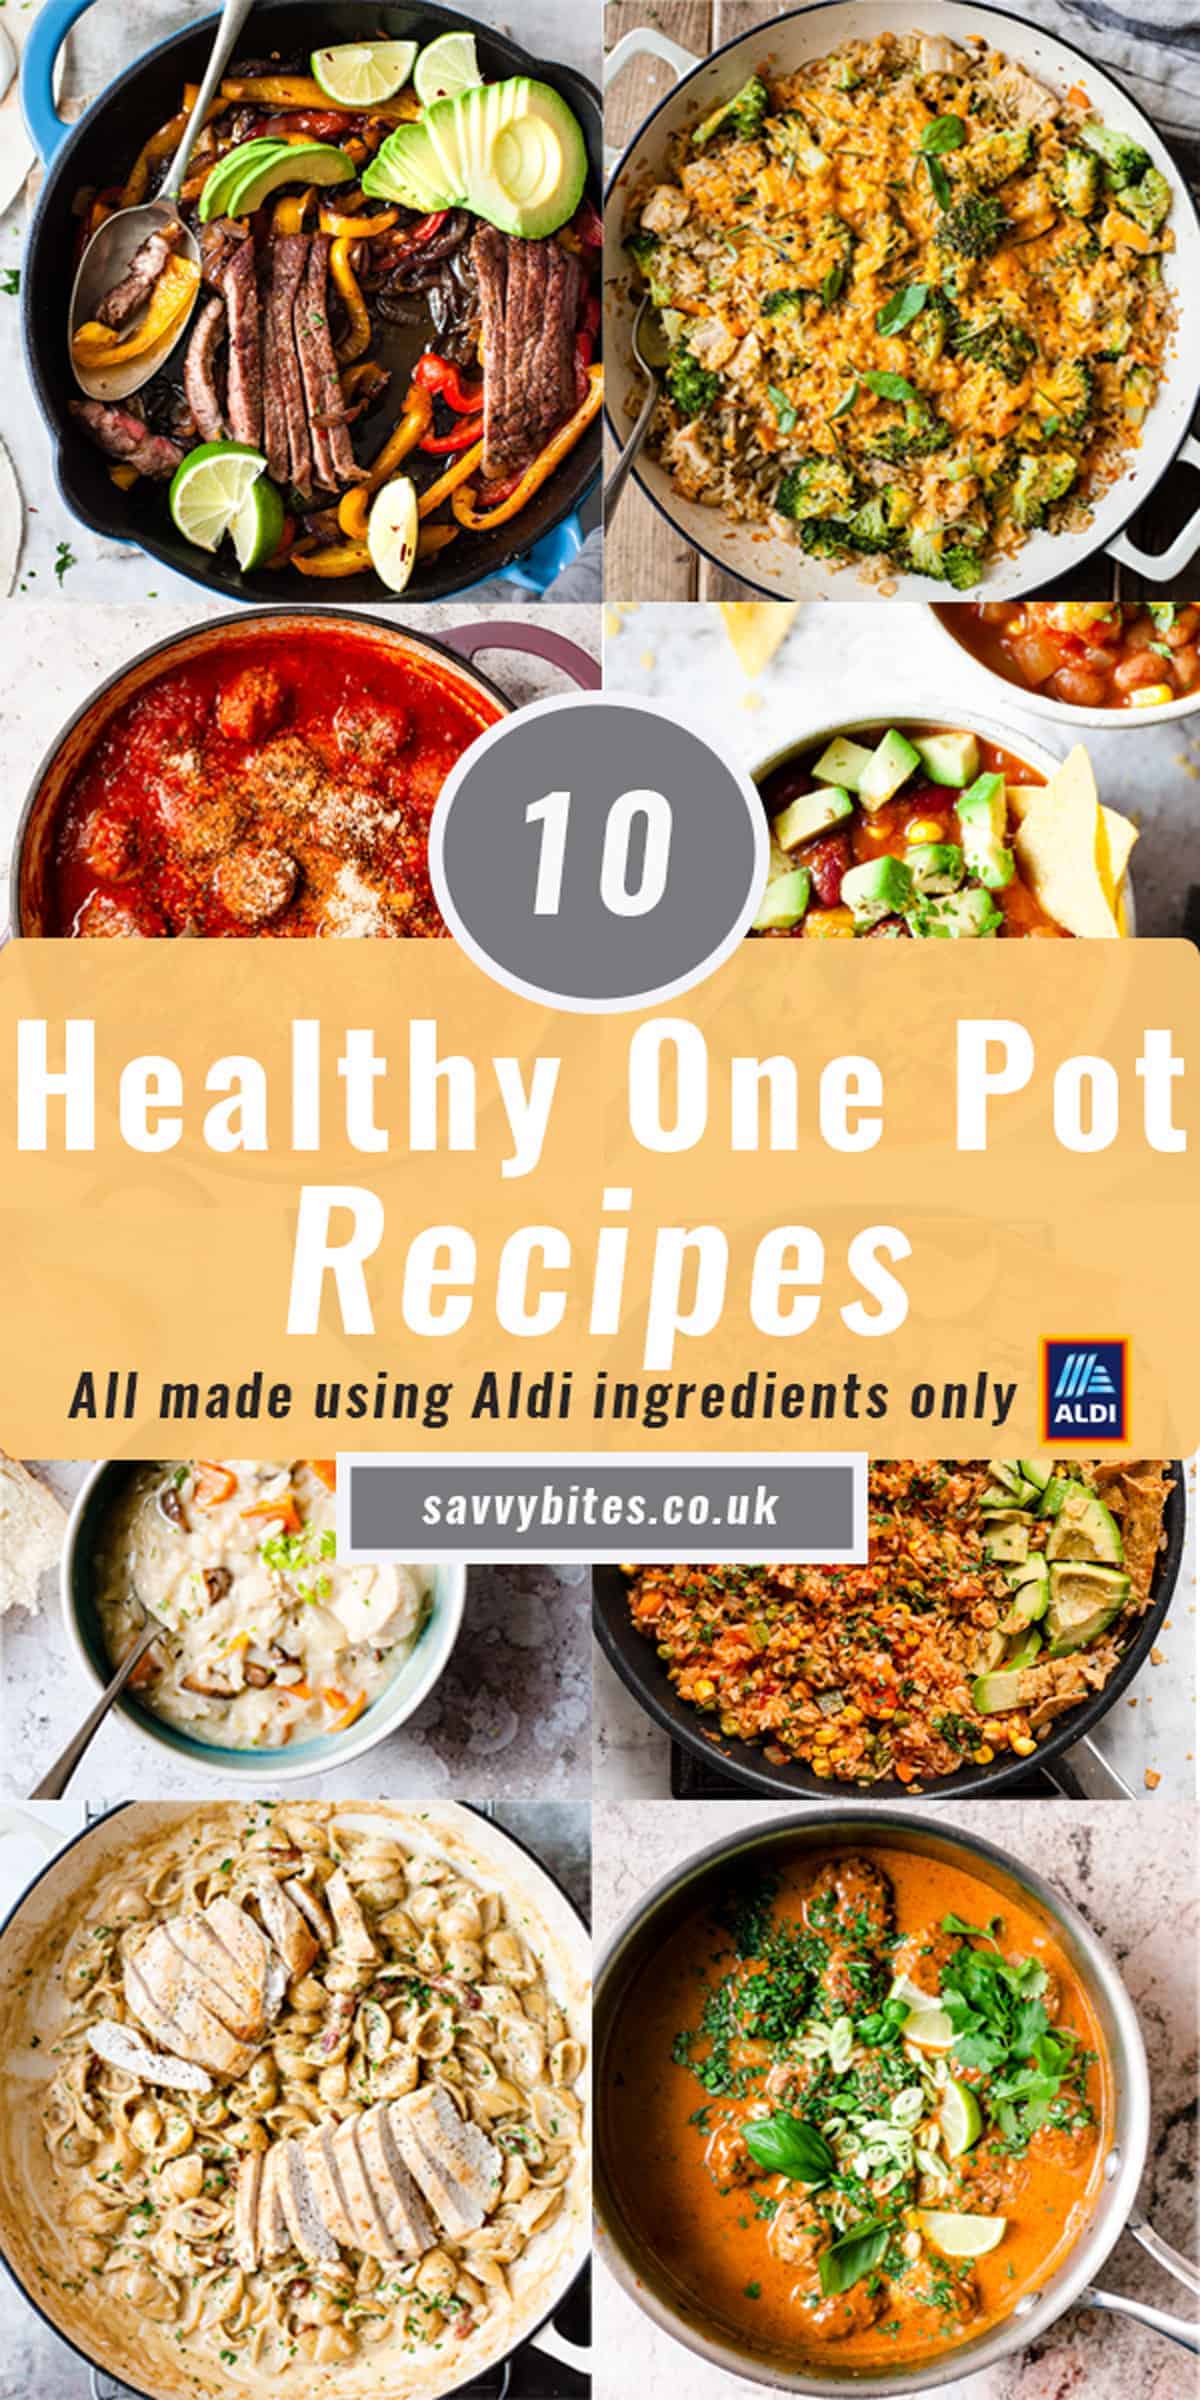 Collage of 10 photos for one pot recipes for Aldi recipes.